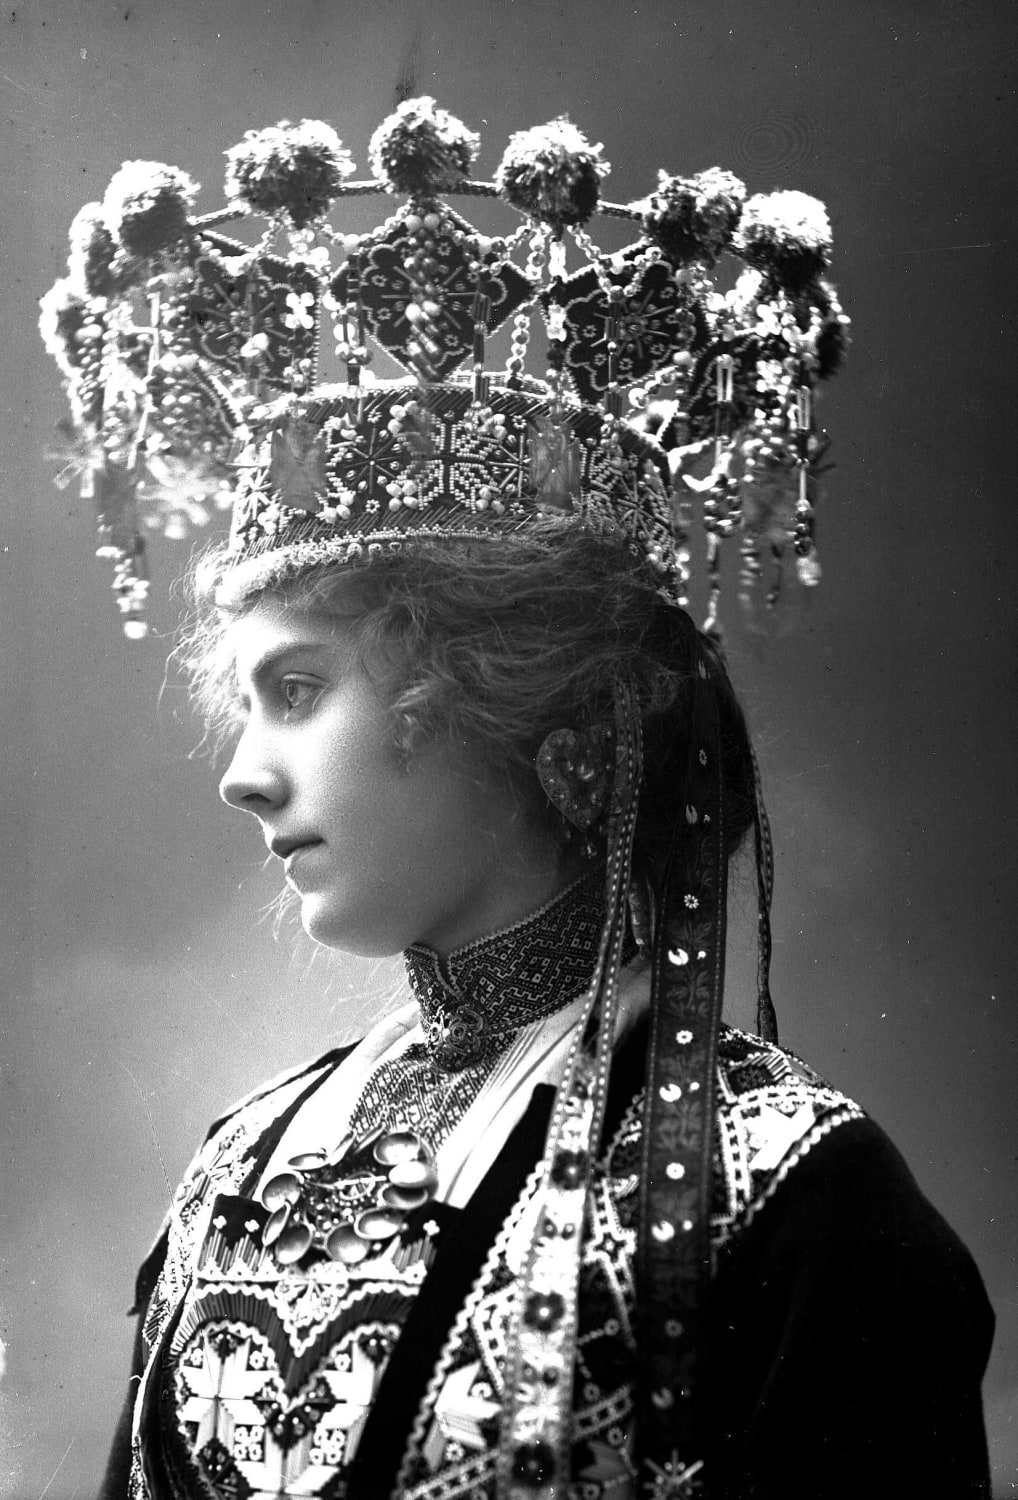 Studio photograph of a Norwegian woman in a wedding dress and bridal crown from Hordaland, 1890's. taken by Sloveig Lund